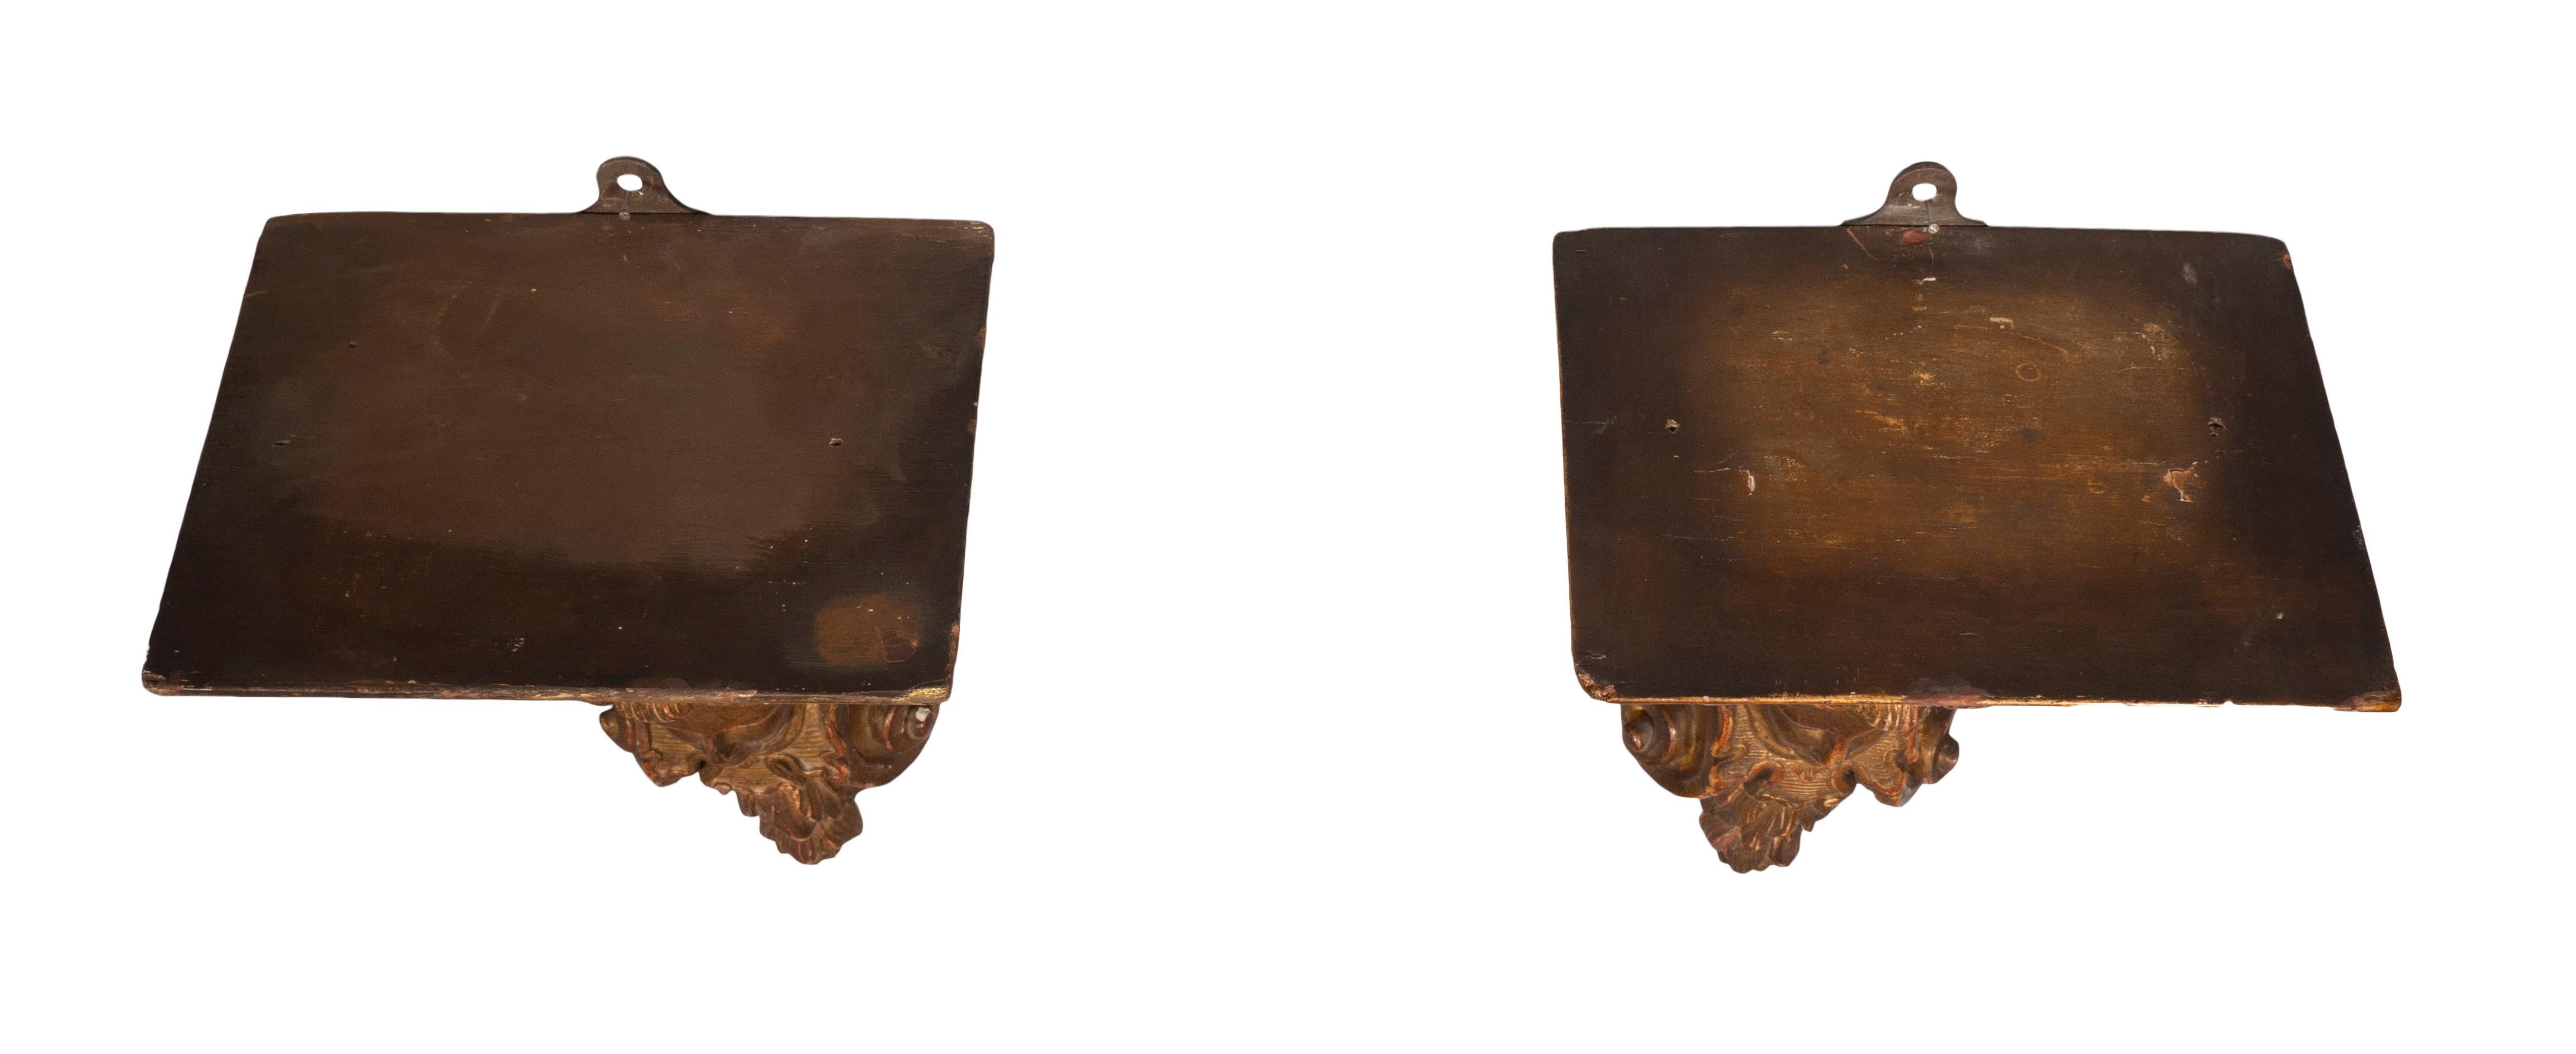 Pair of Regence Giltwood Wall Brackets For Sale 9